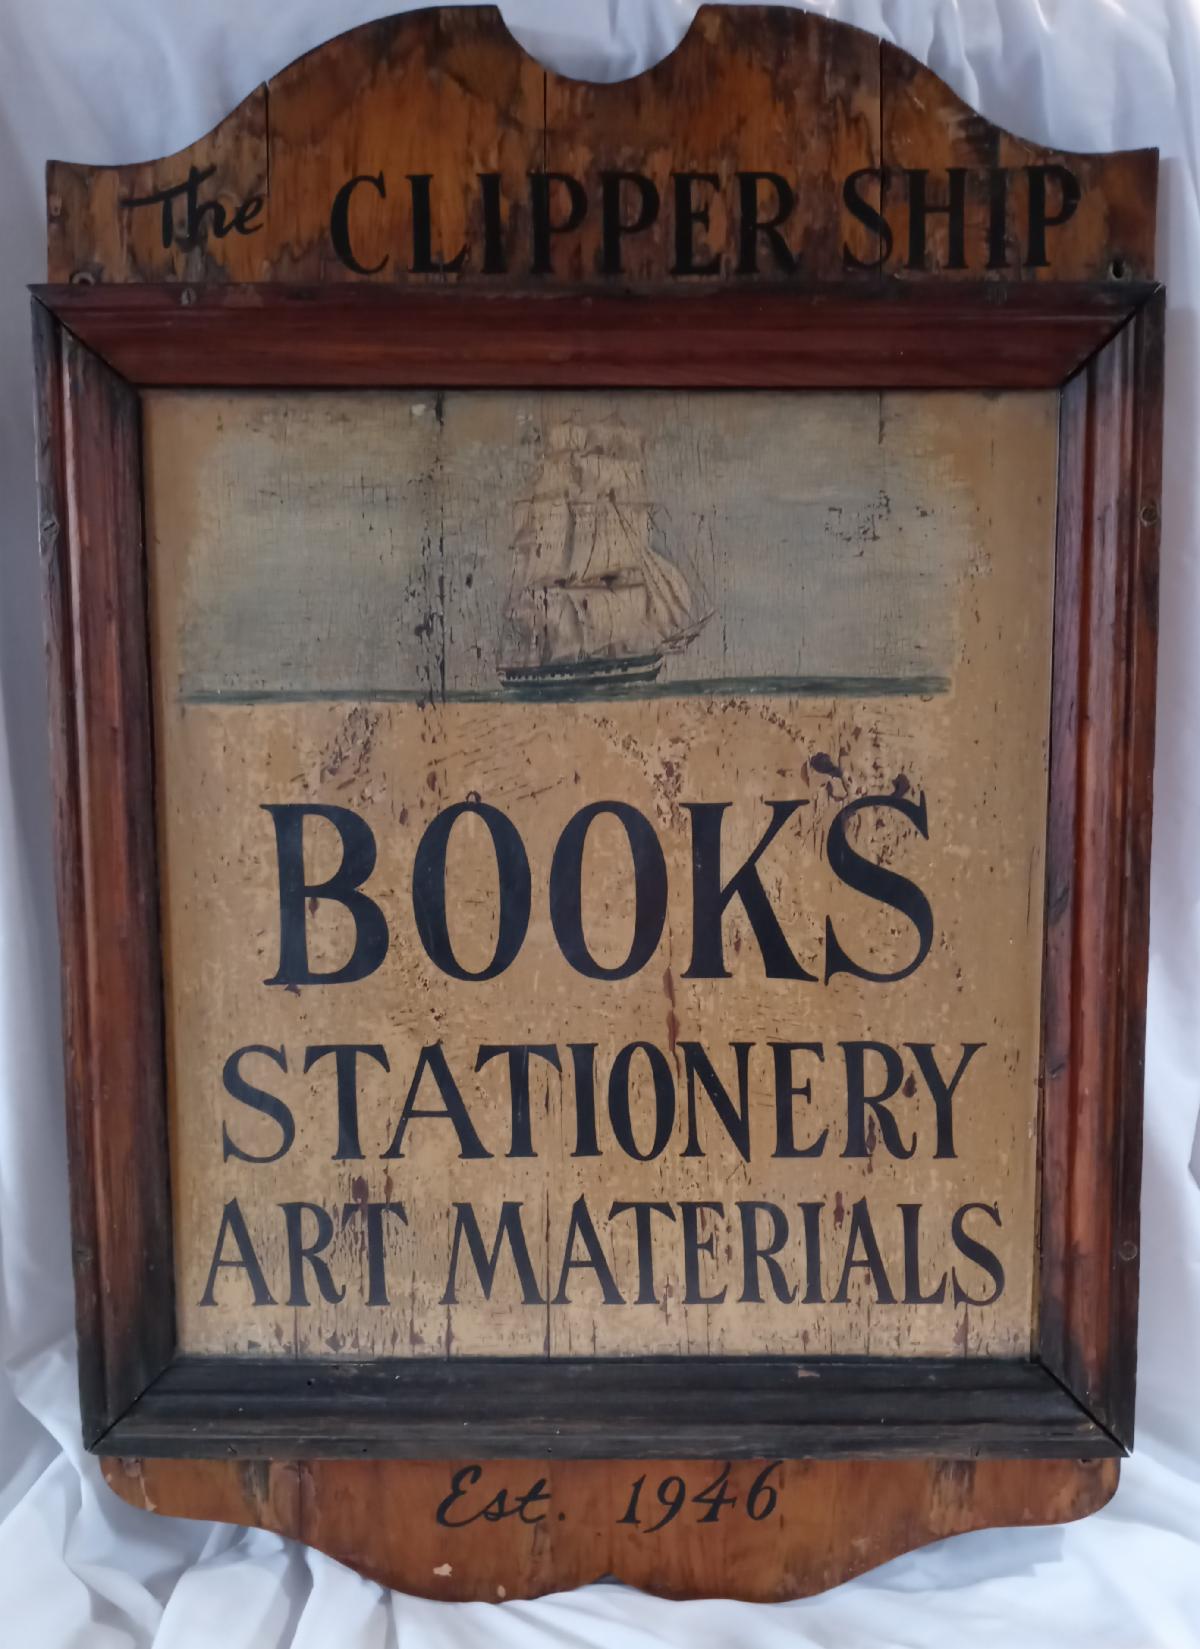 Vintage Signage from the Essex Historical Society's Collections